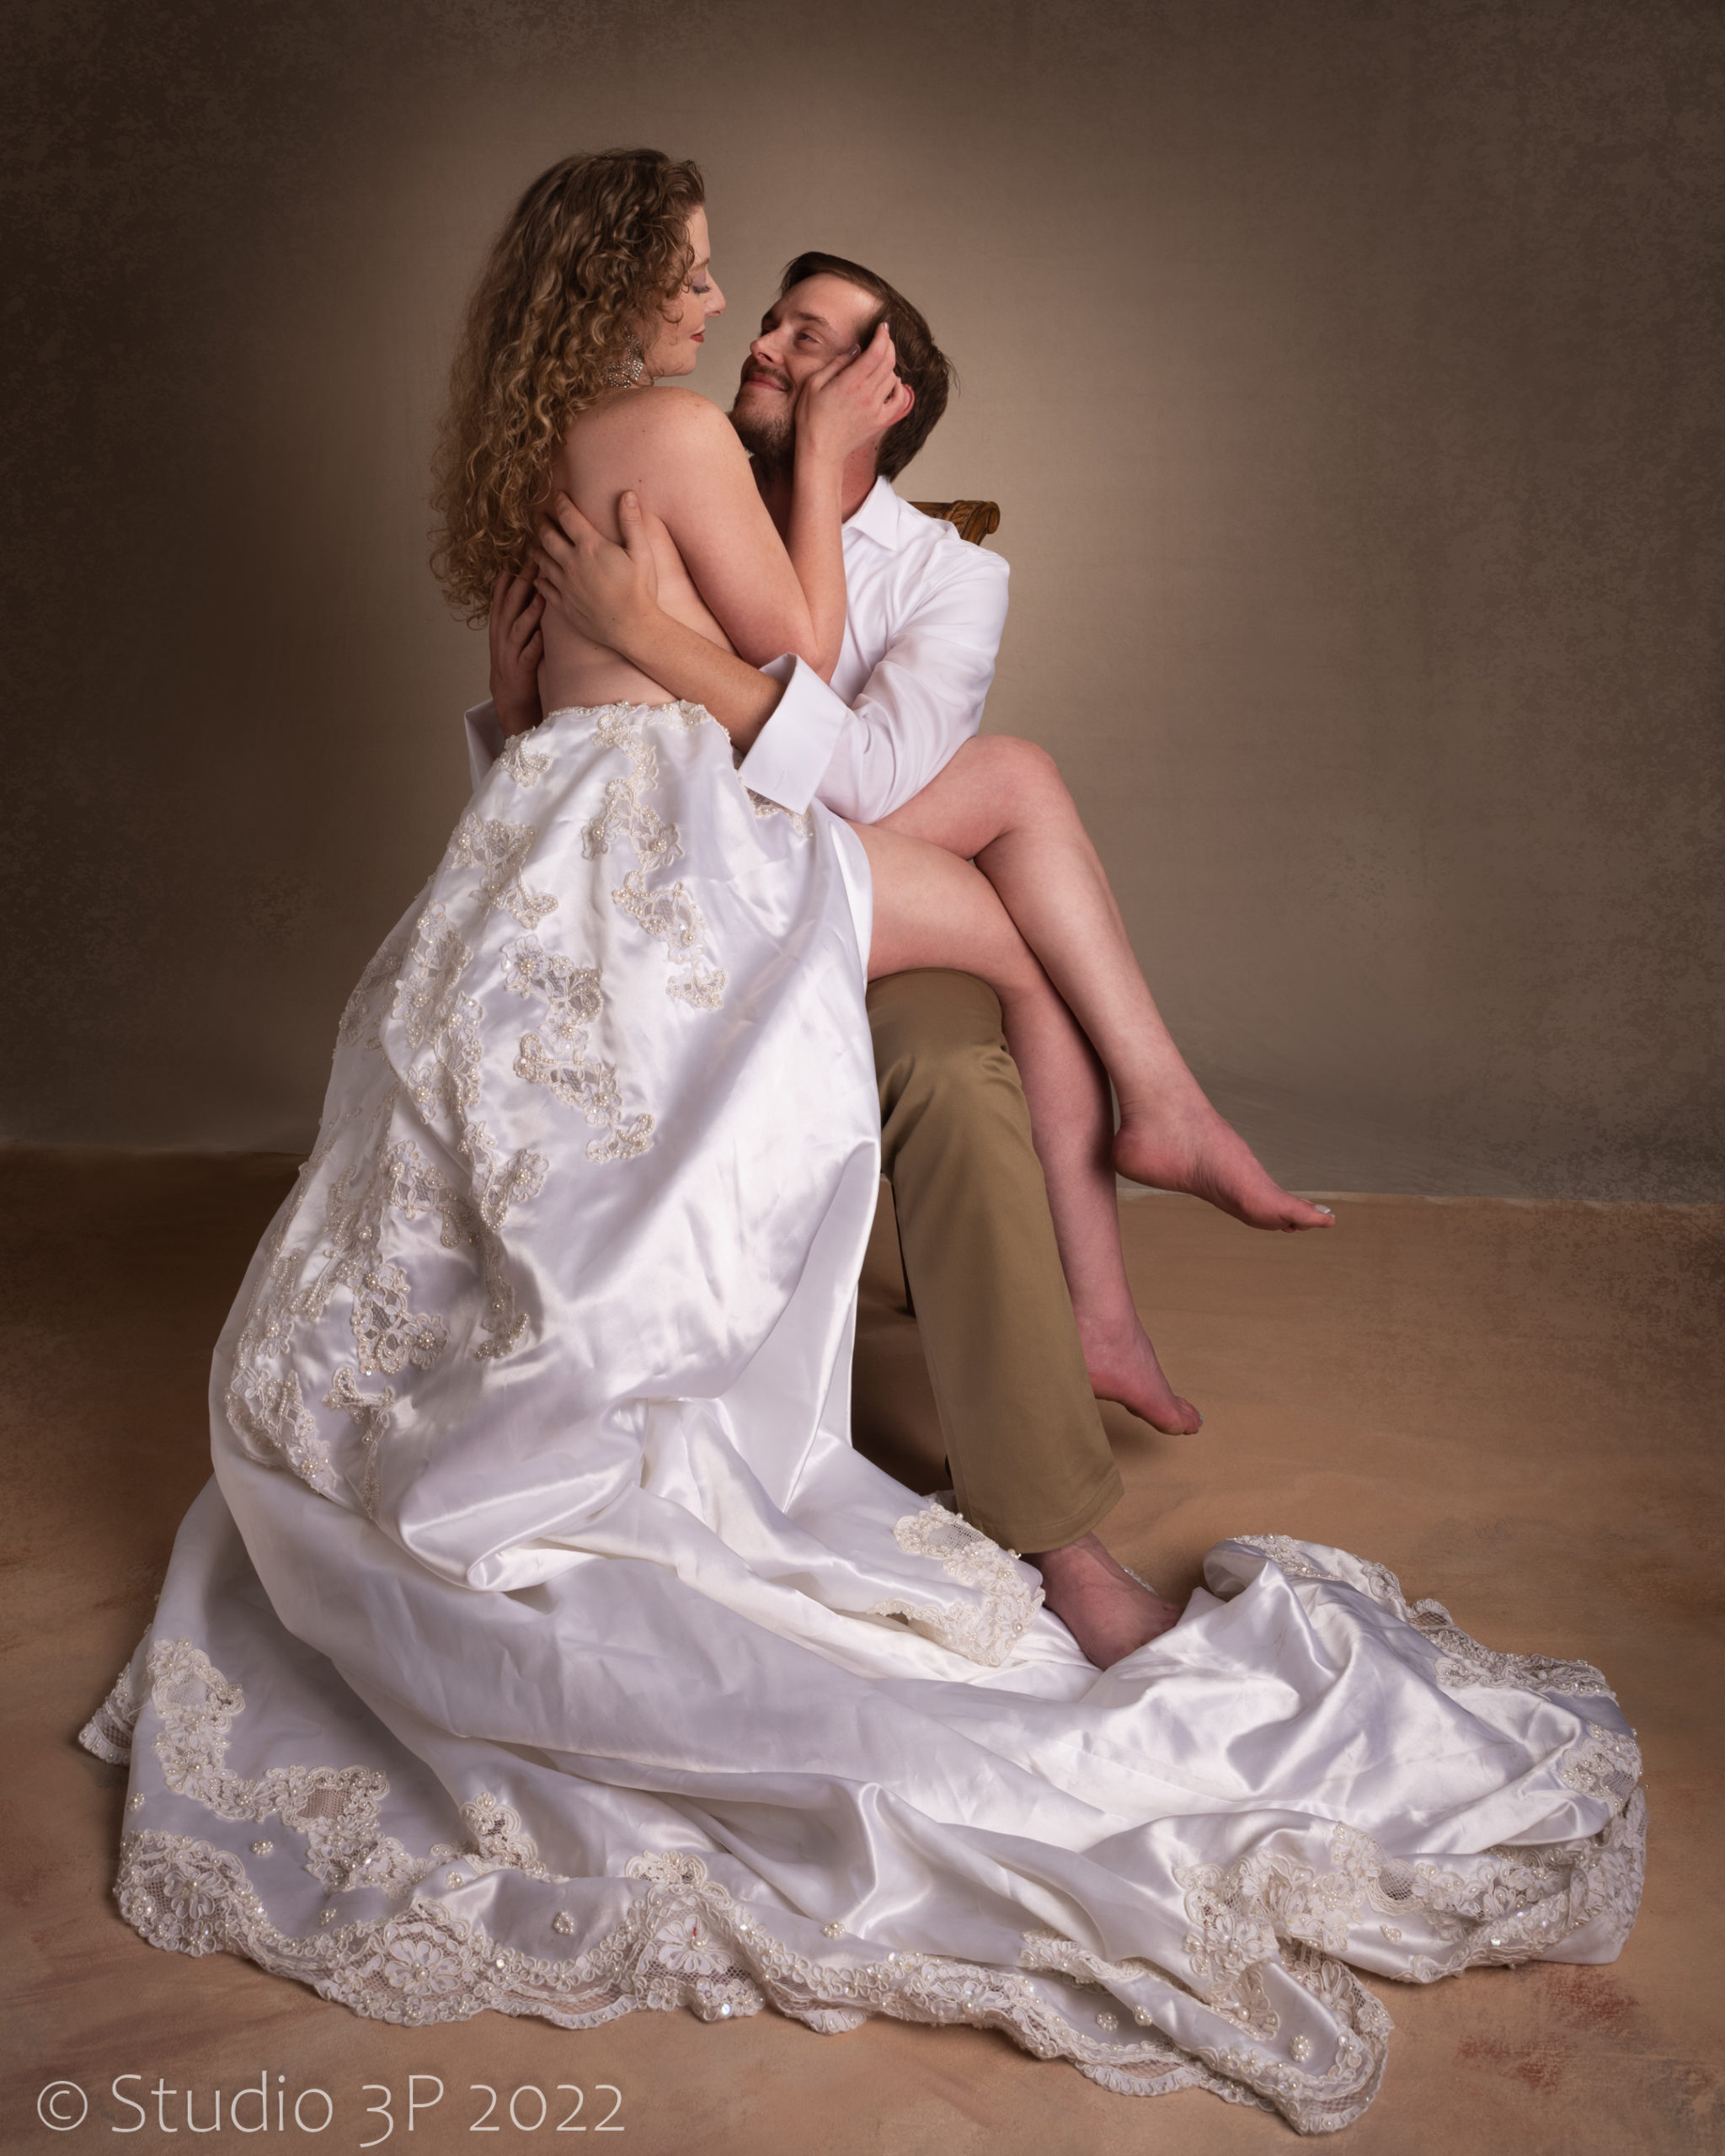 Passionate couple with white flowing gown.